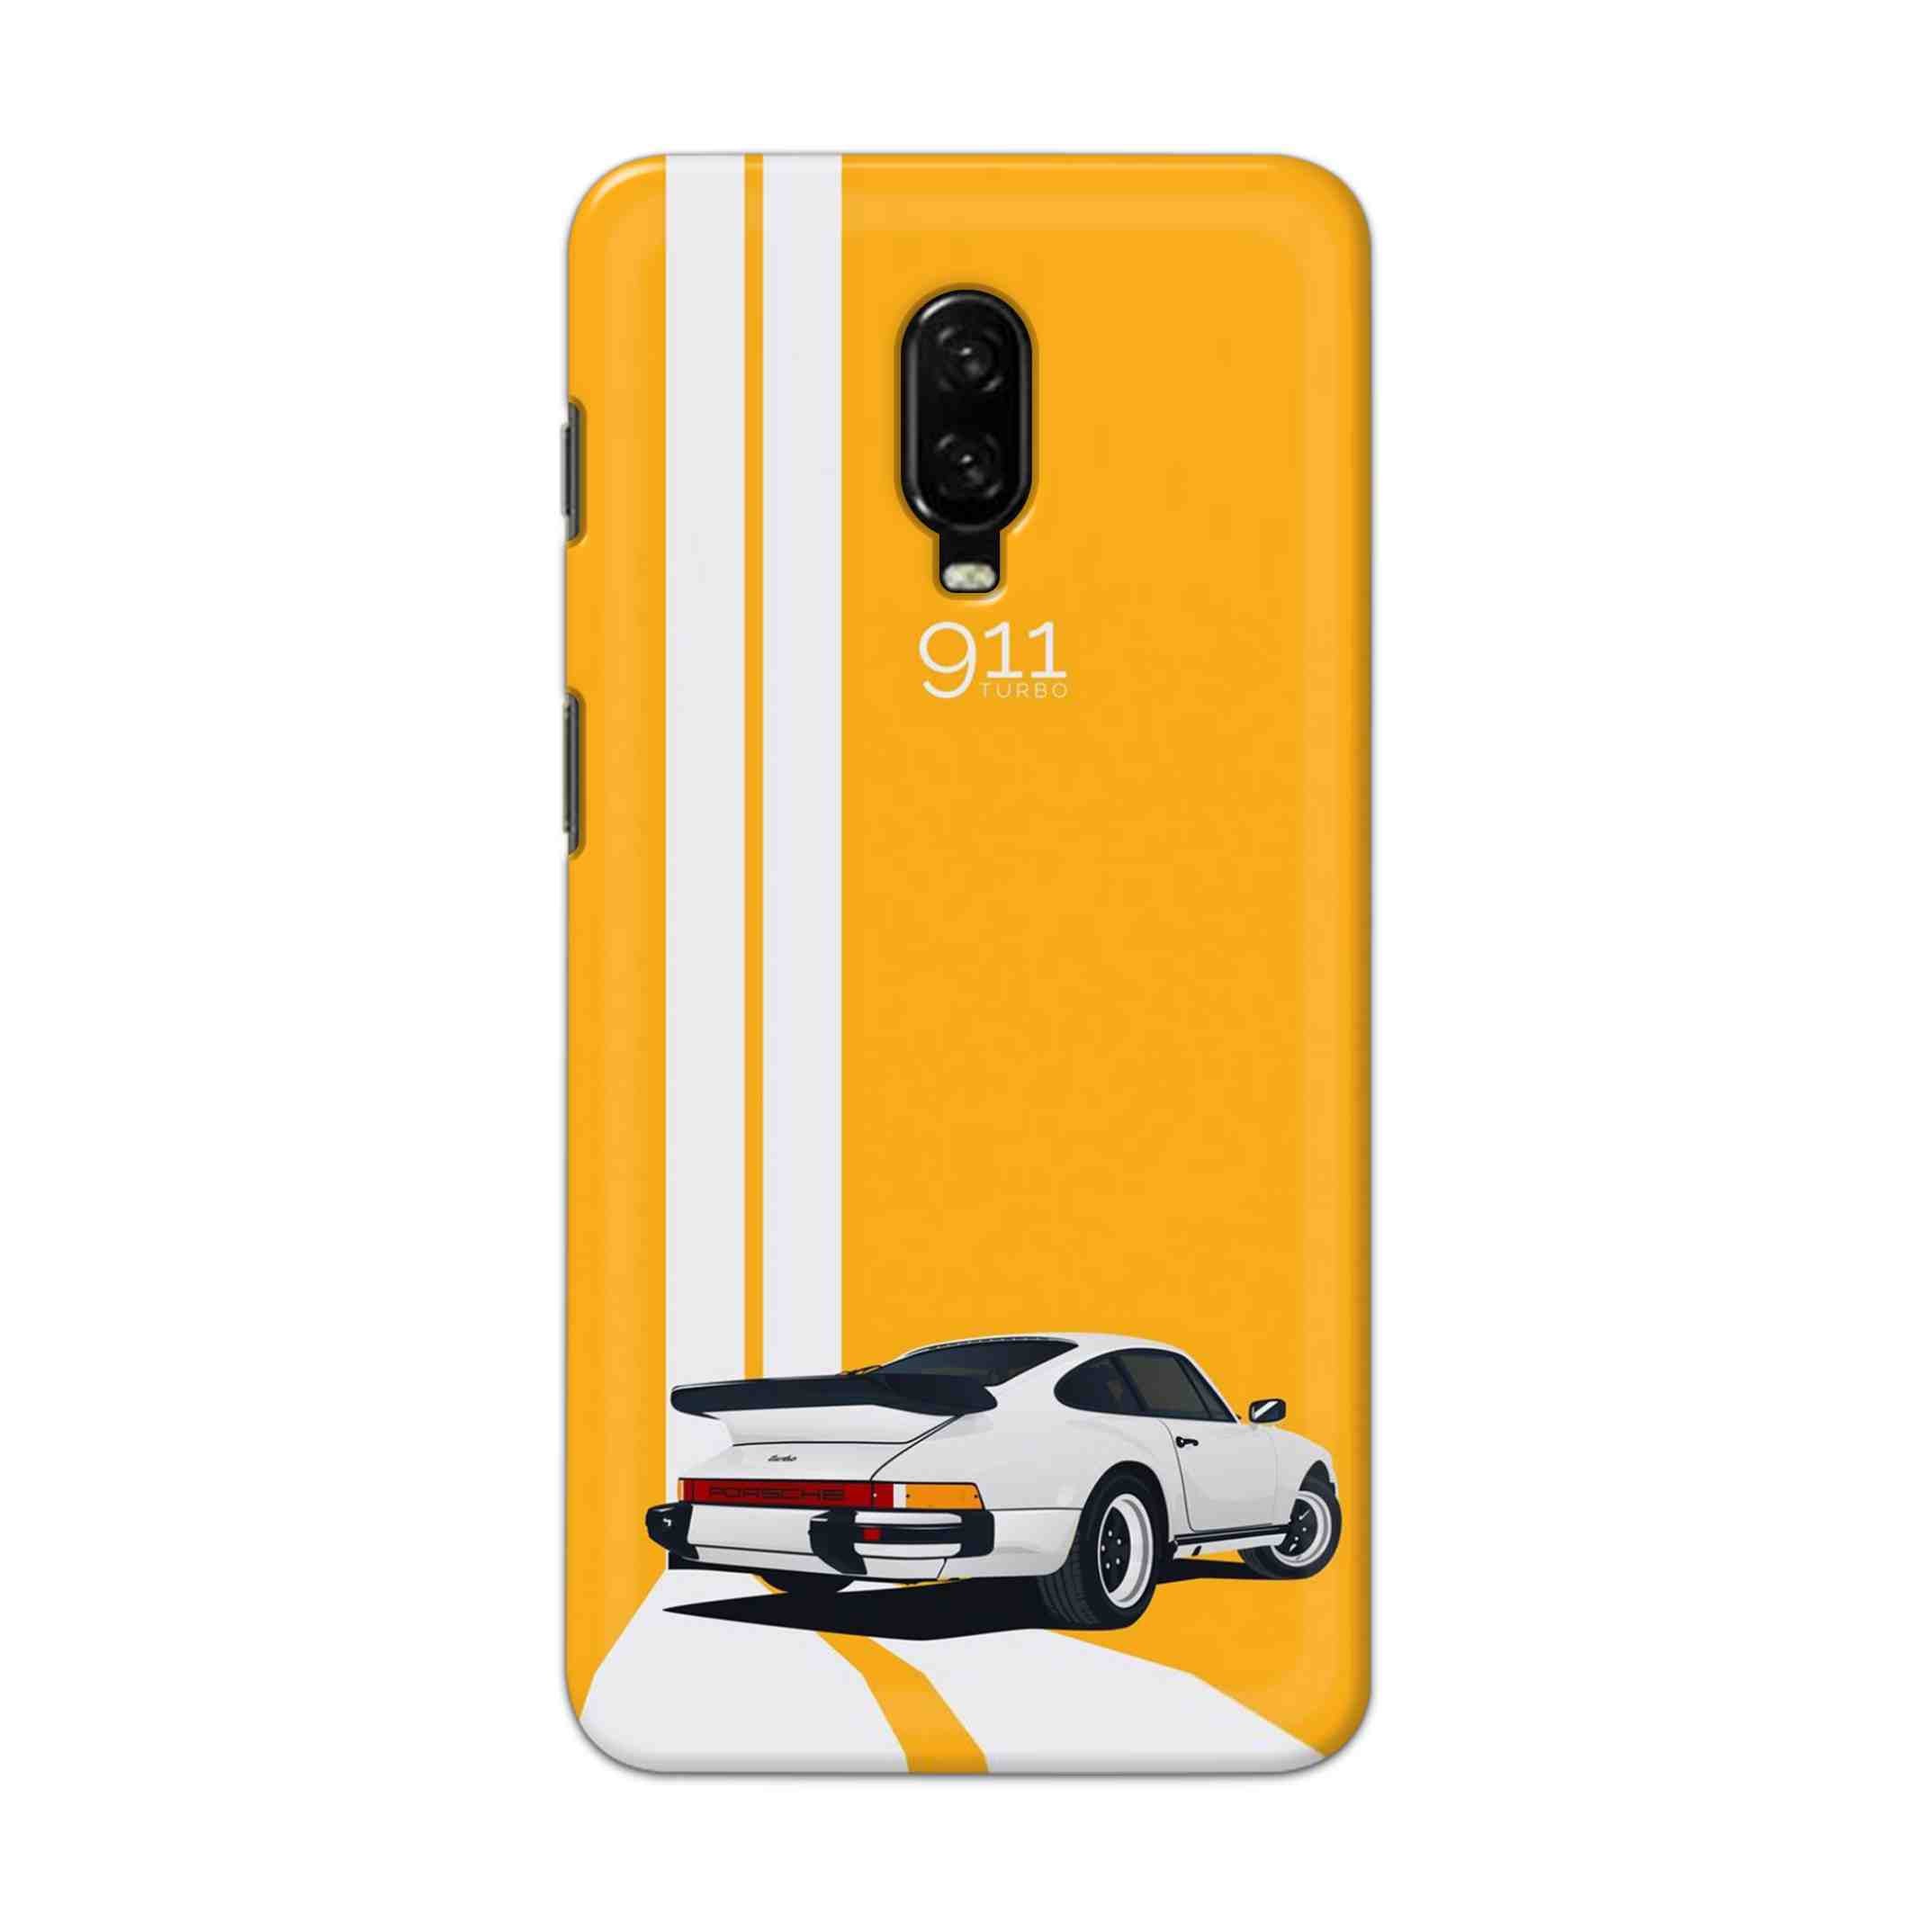 Buy 911 Gt Porche Hard Back Mobile Phone Case Cover For OnePlus 6T Online